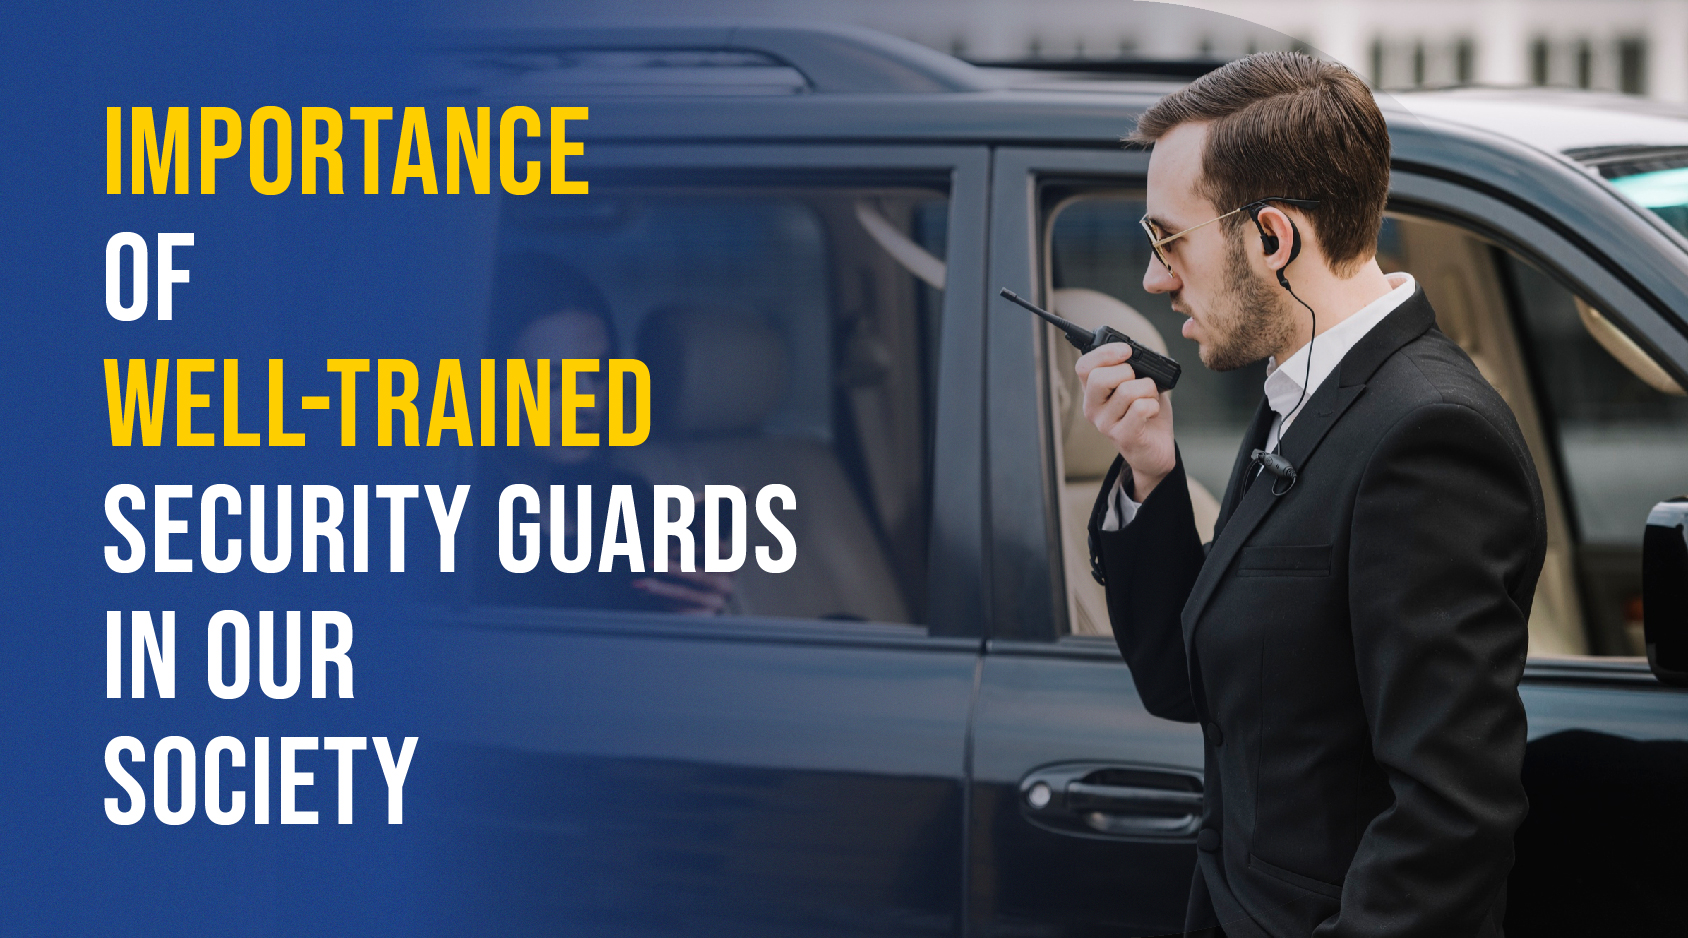 Importance of well trained security guards in our society